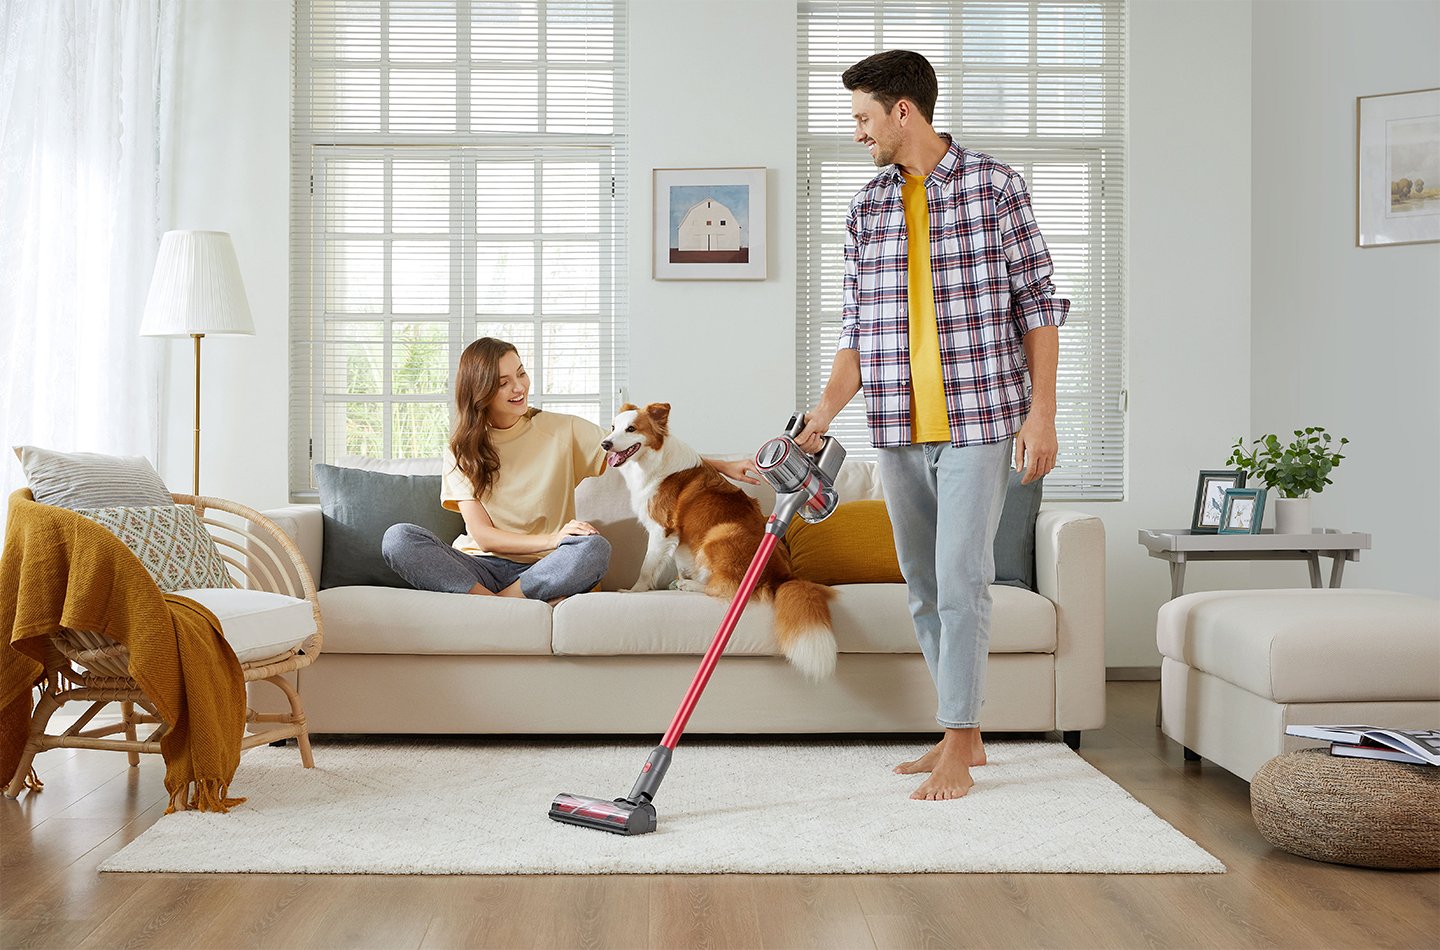 Roborock H7 Cordless Vacuum Review: Everything You Need